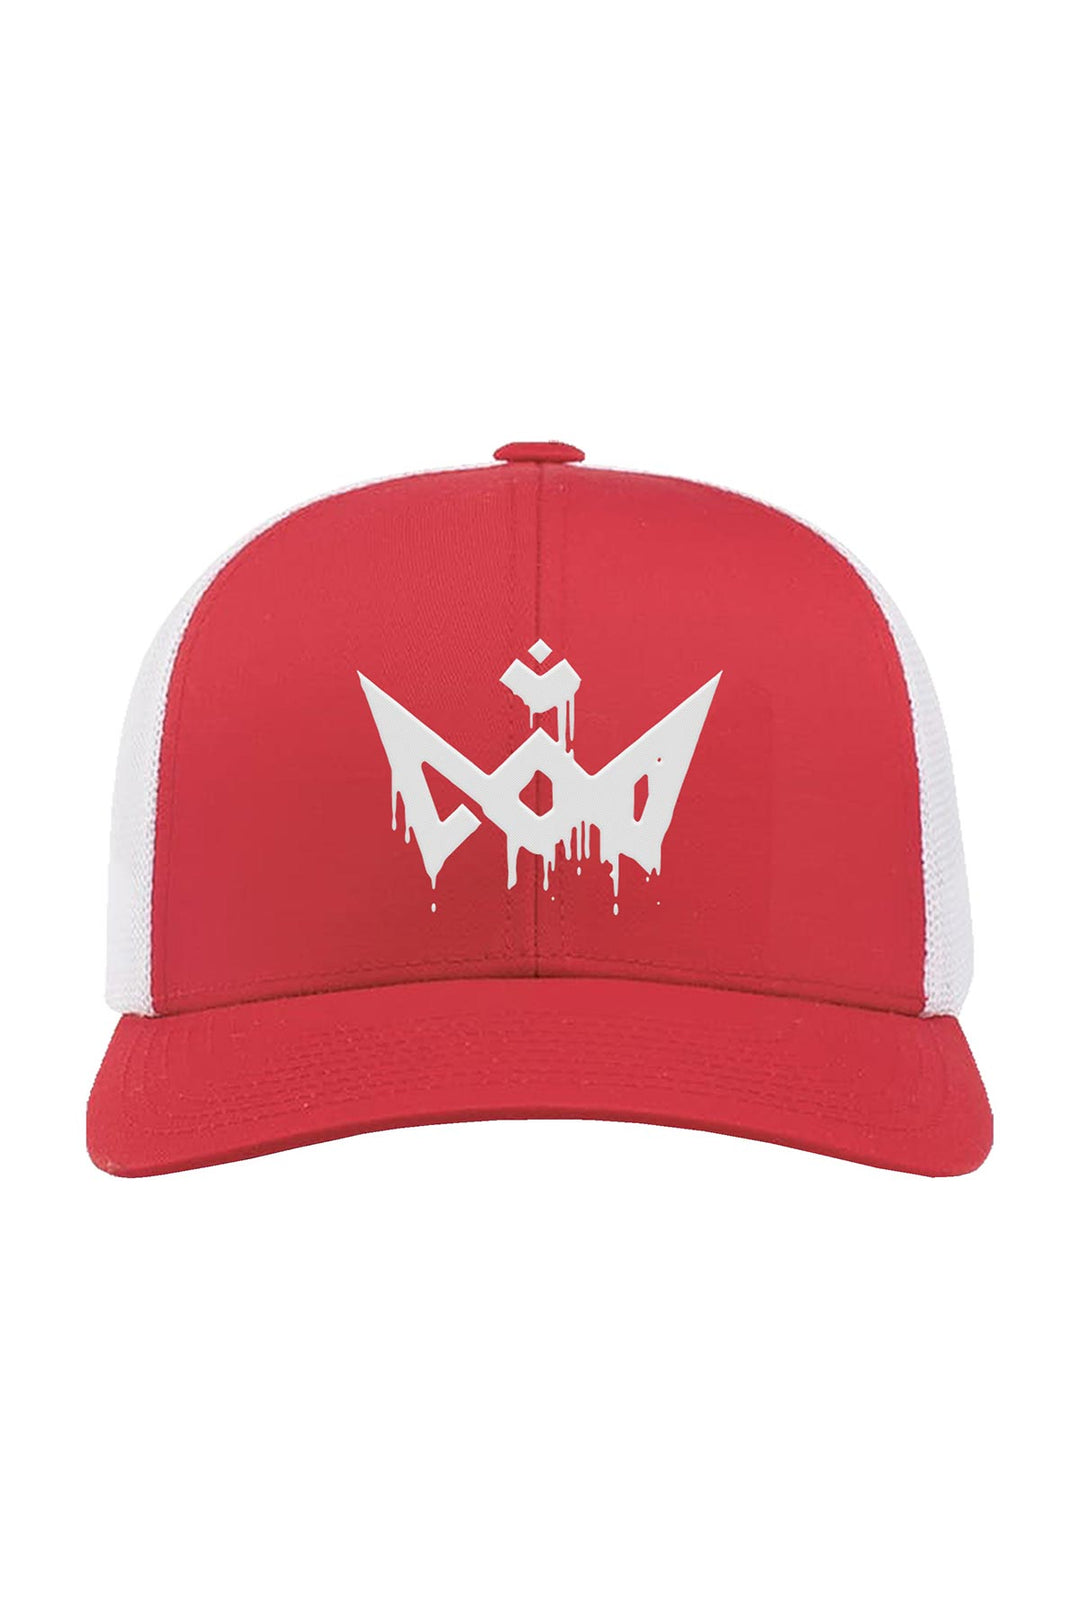 Trucker Snapback Cap - Drippy Crown Embroidery